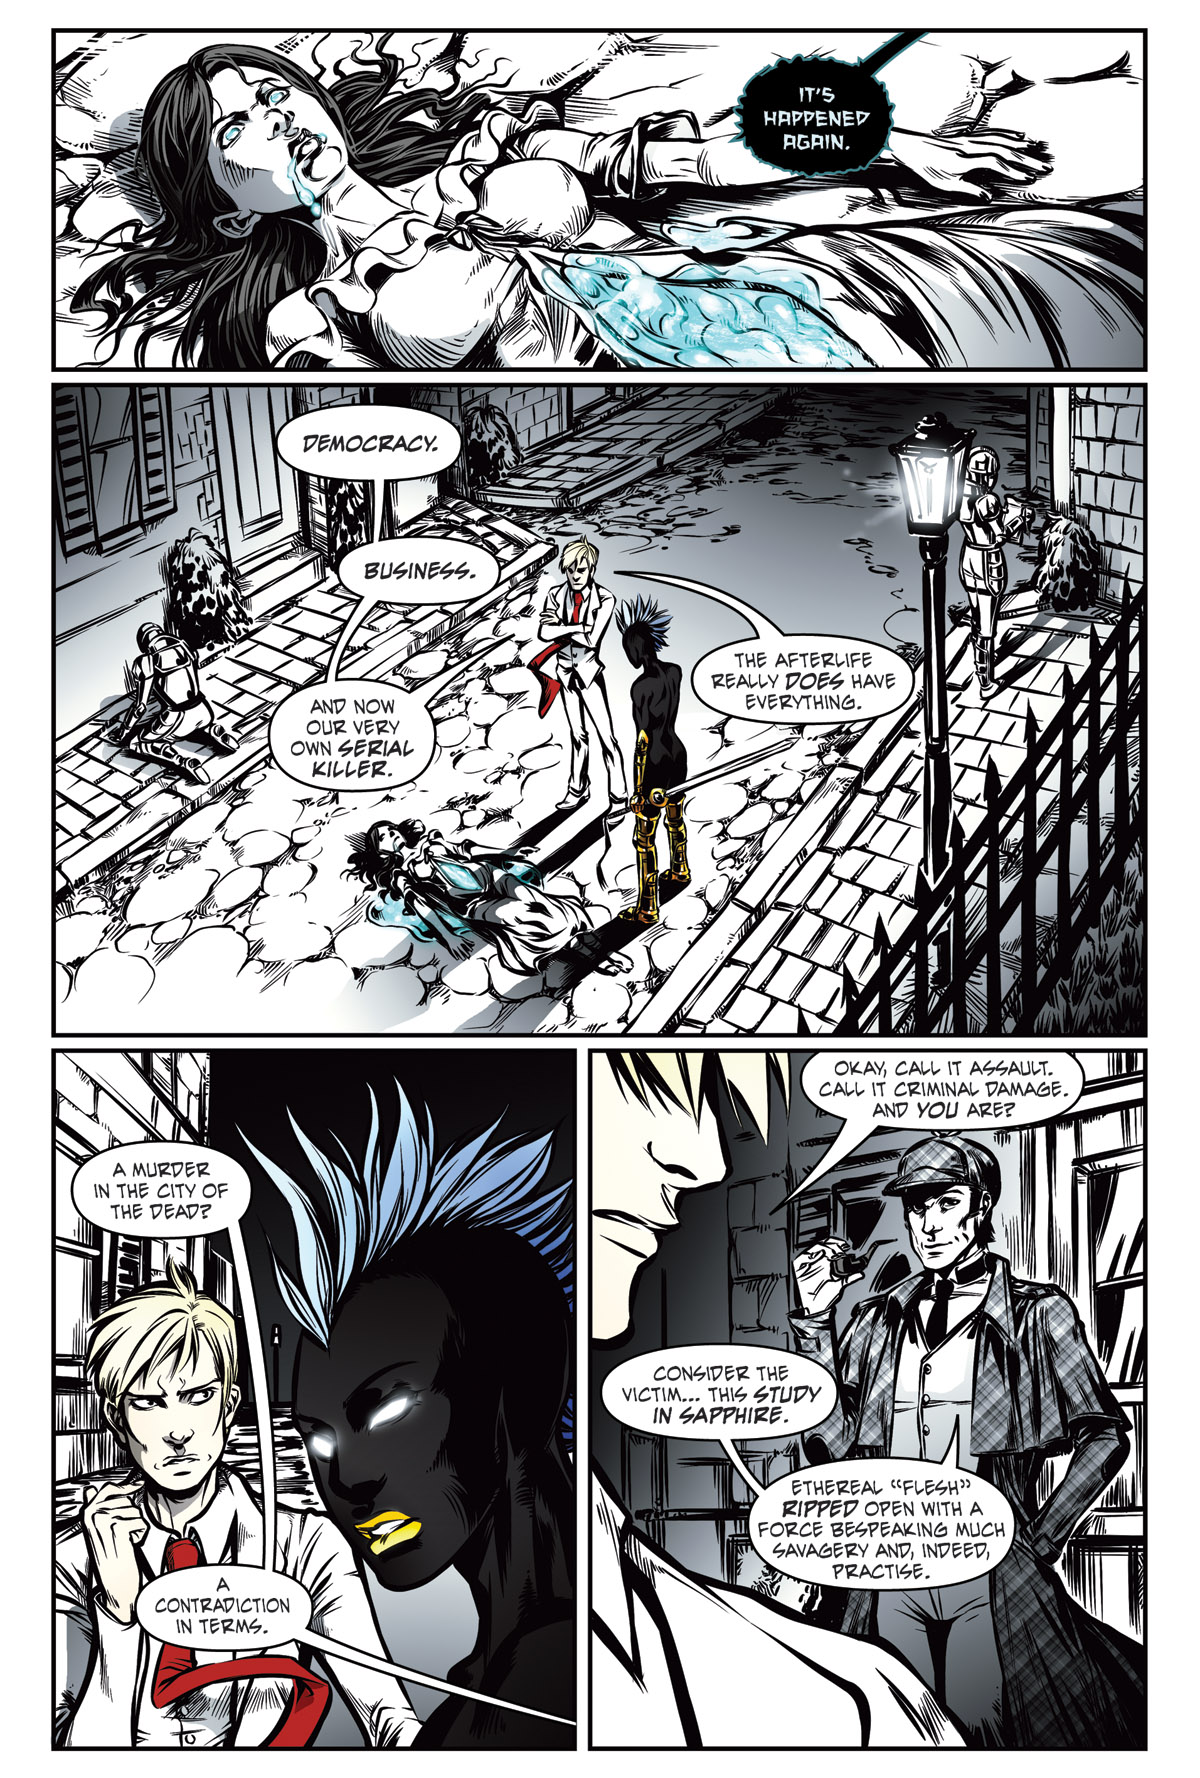 Afterlife Inc. | Elementary | Page 1